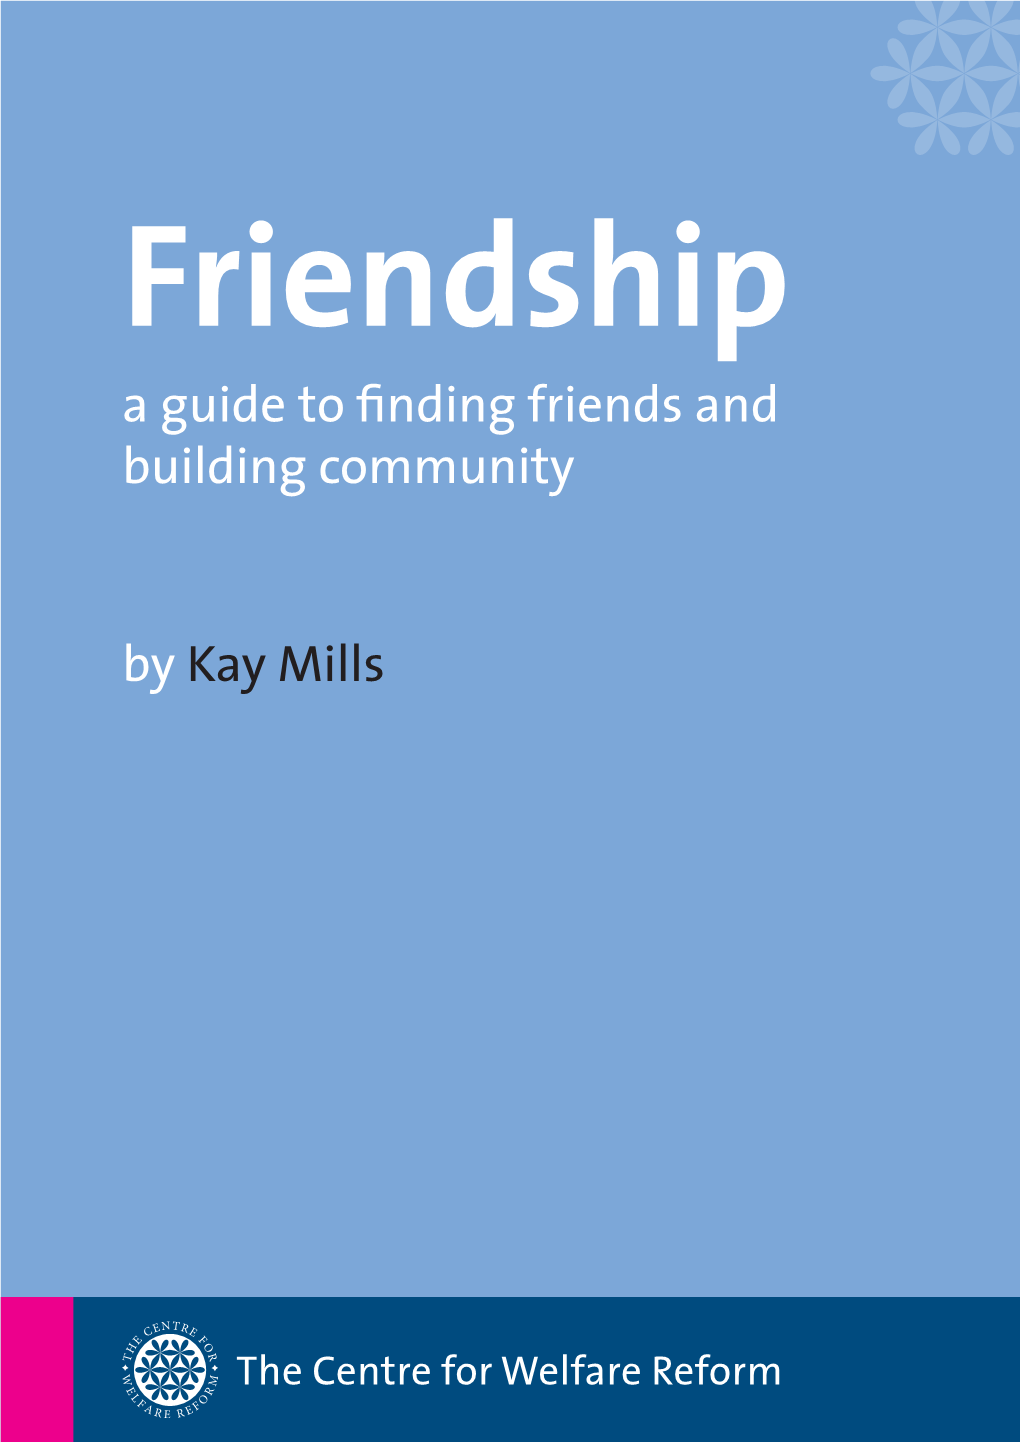 A Guide to Finding Friends and Building Community by Kay Mills